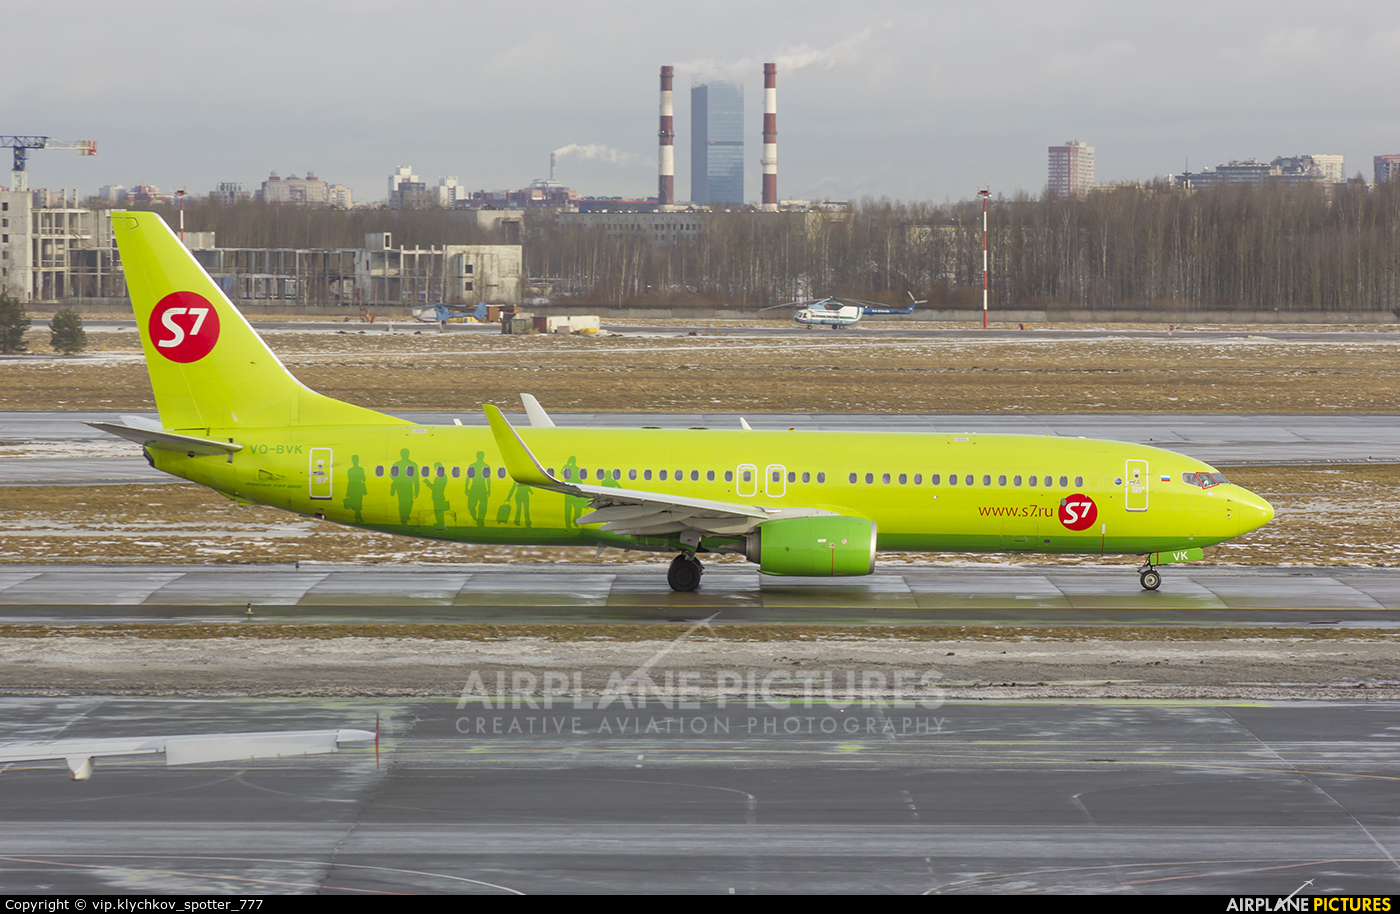 S7 Airlines VQ-BVK aircraft at St. Petersburg - Pulkovo